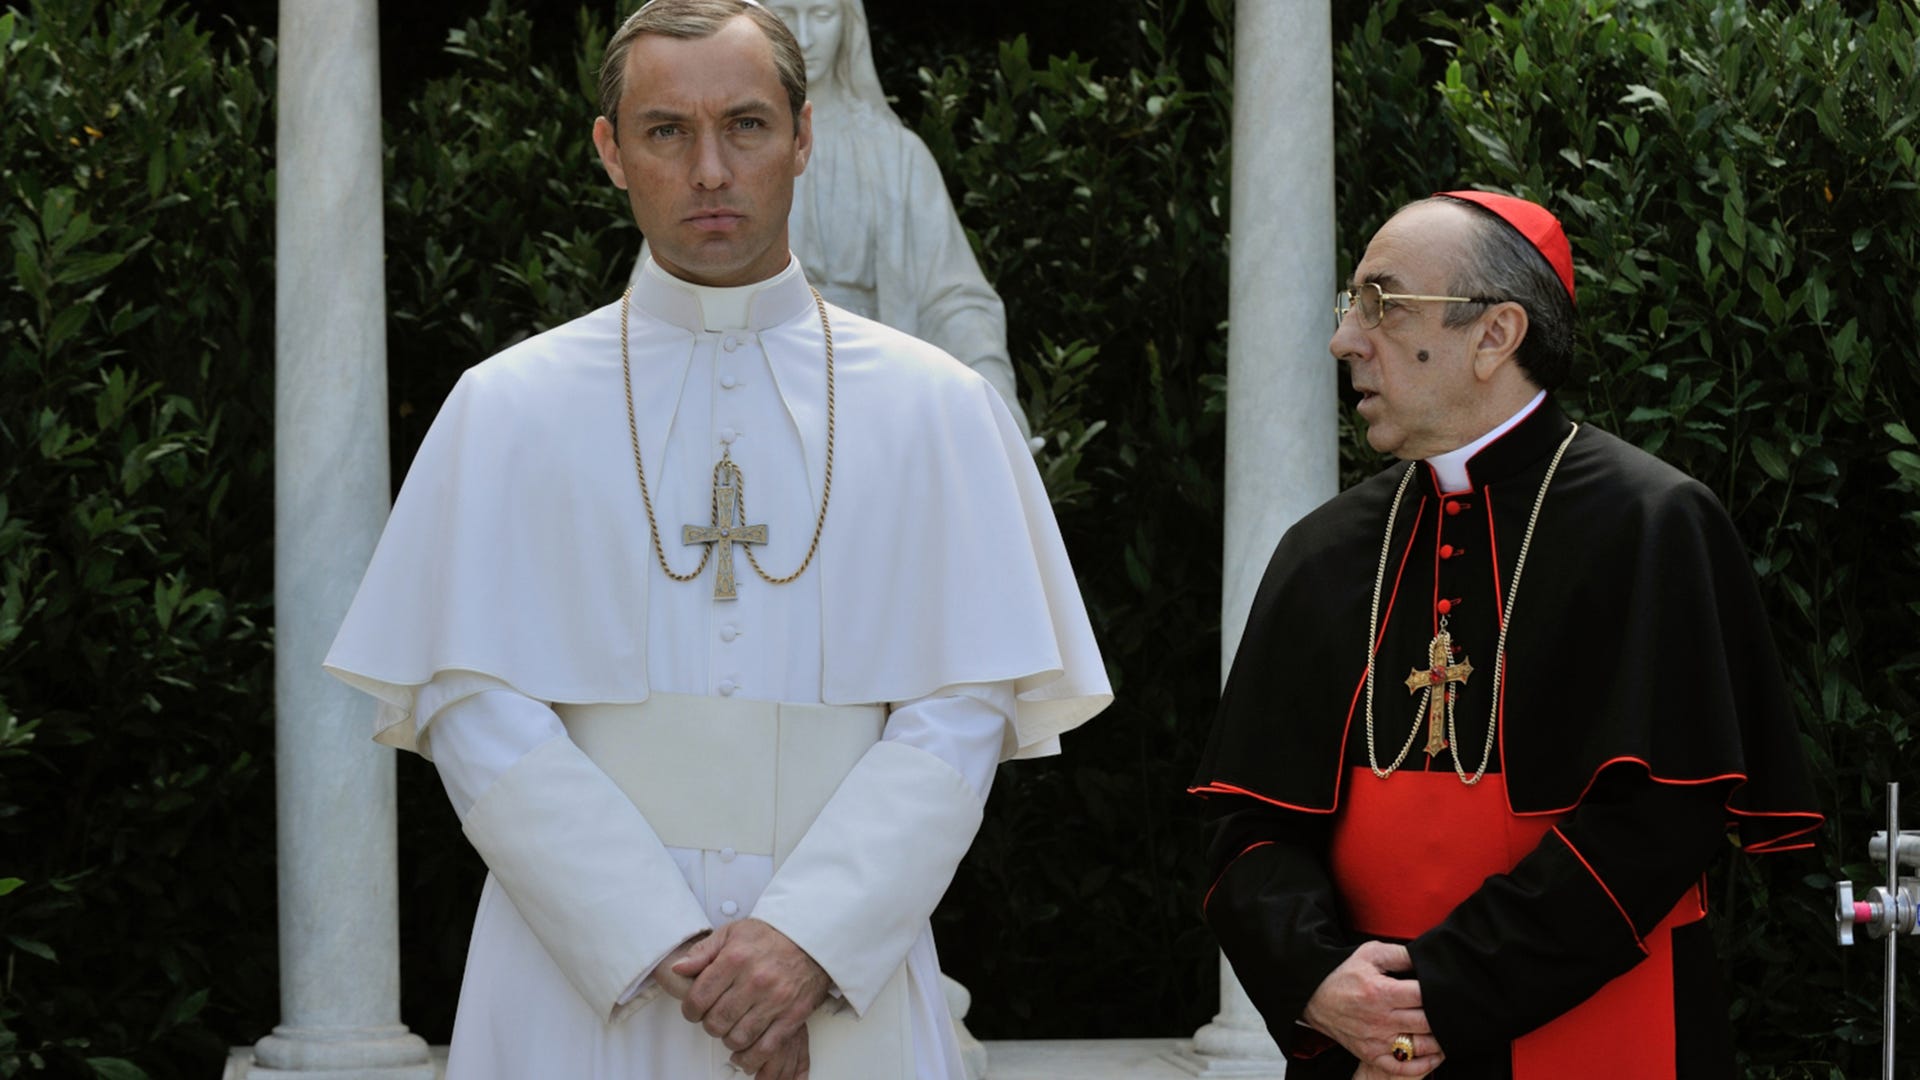 ​Jude Law and Silvio Orlando, The Young Pope